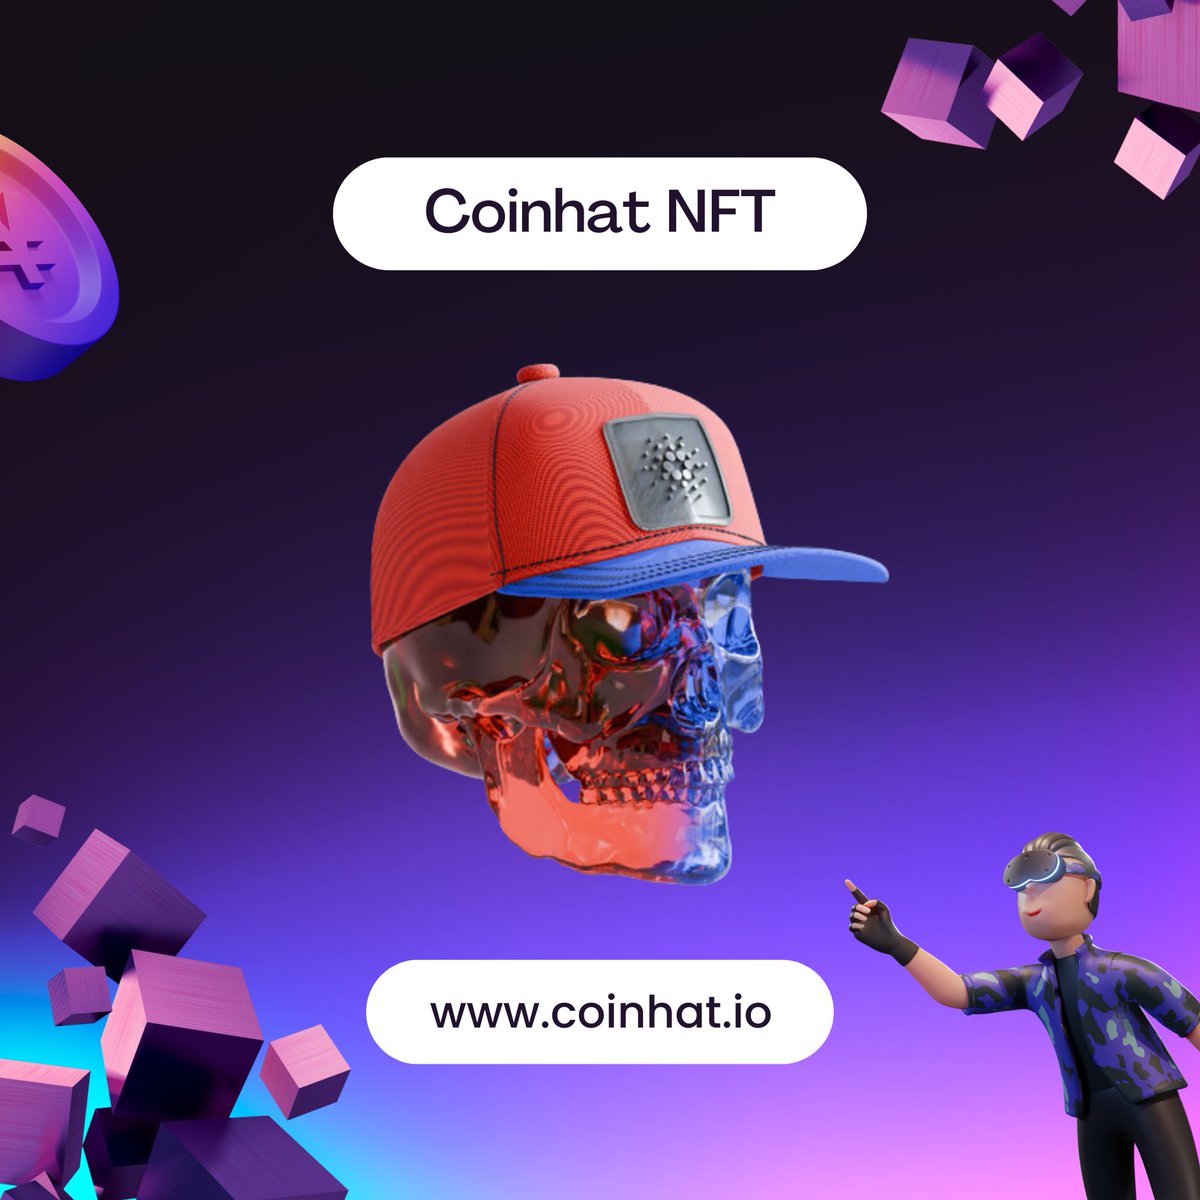 🔥 Limited Edition - Only 5000 Pieces!
🎨 Unique Digital Artworks
🚀 Available NOW on OpenSea

opensea.io/collection/coi…

#CoinHatNFT #NFTDrop #DigitalArt #CryptoCollectibles #LimitedEdition #OpenSea #NFTCommunity #ArtInnovation #GetItNow #NFTMagic